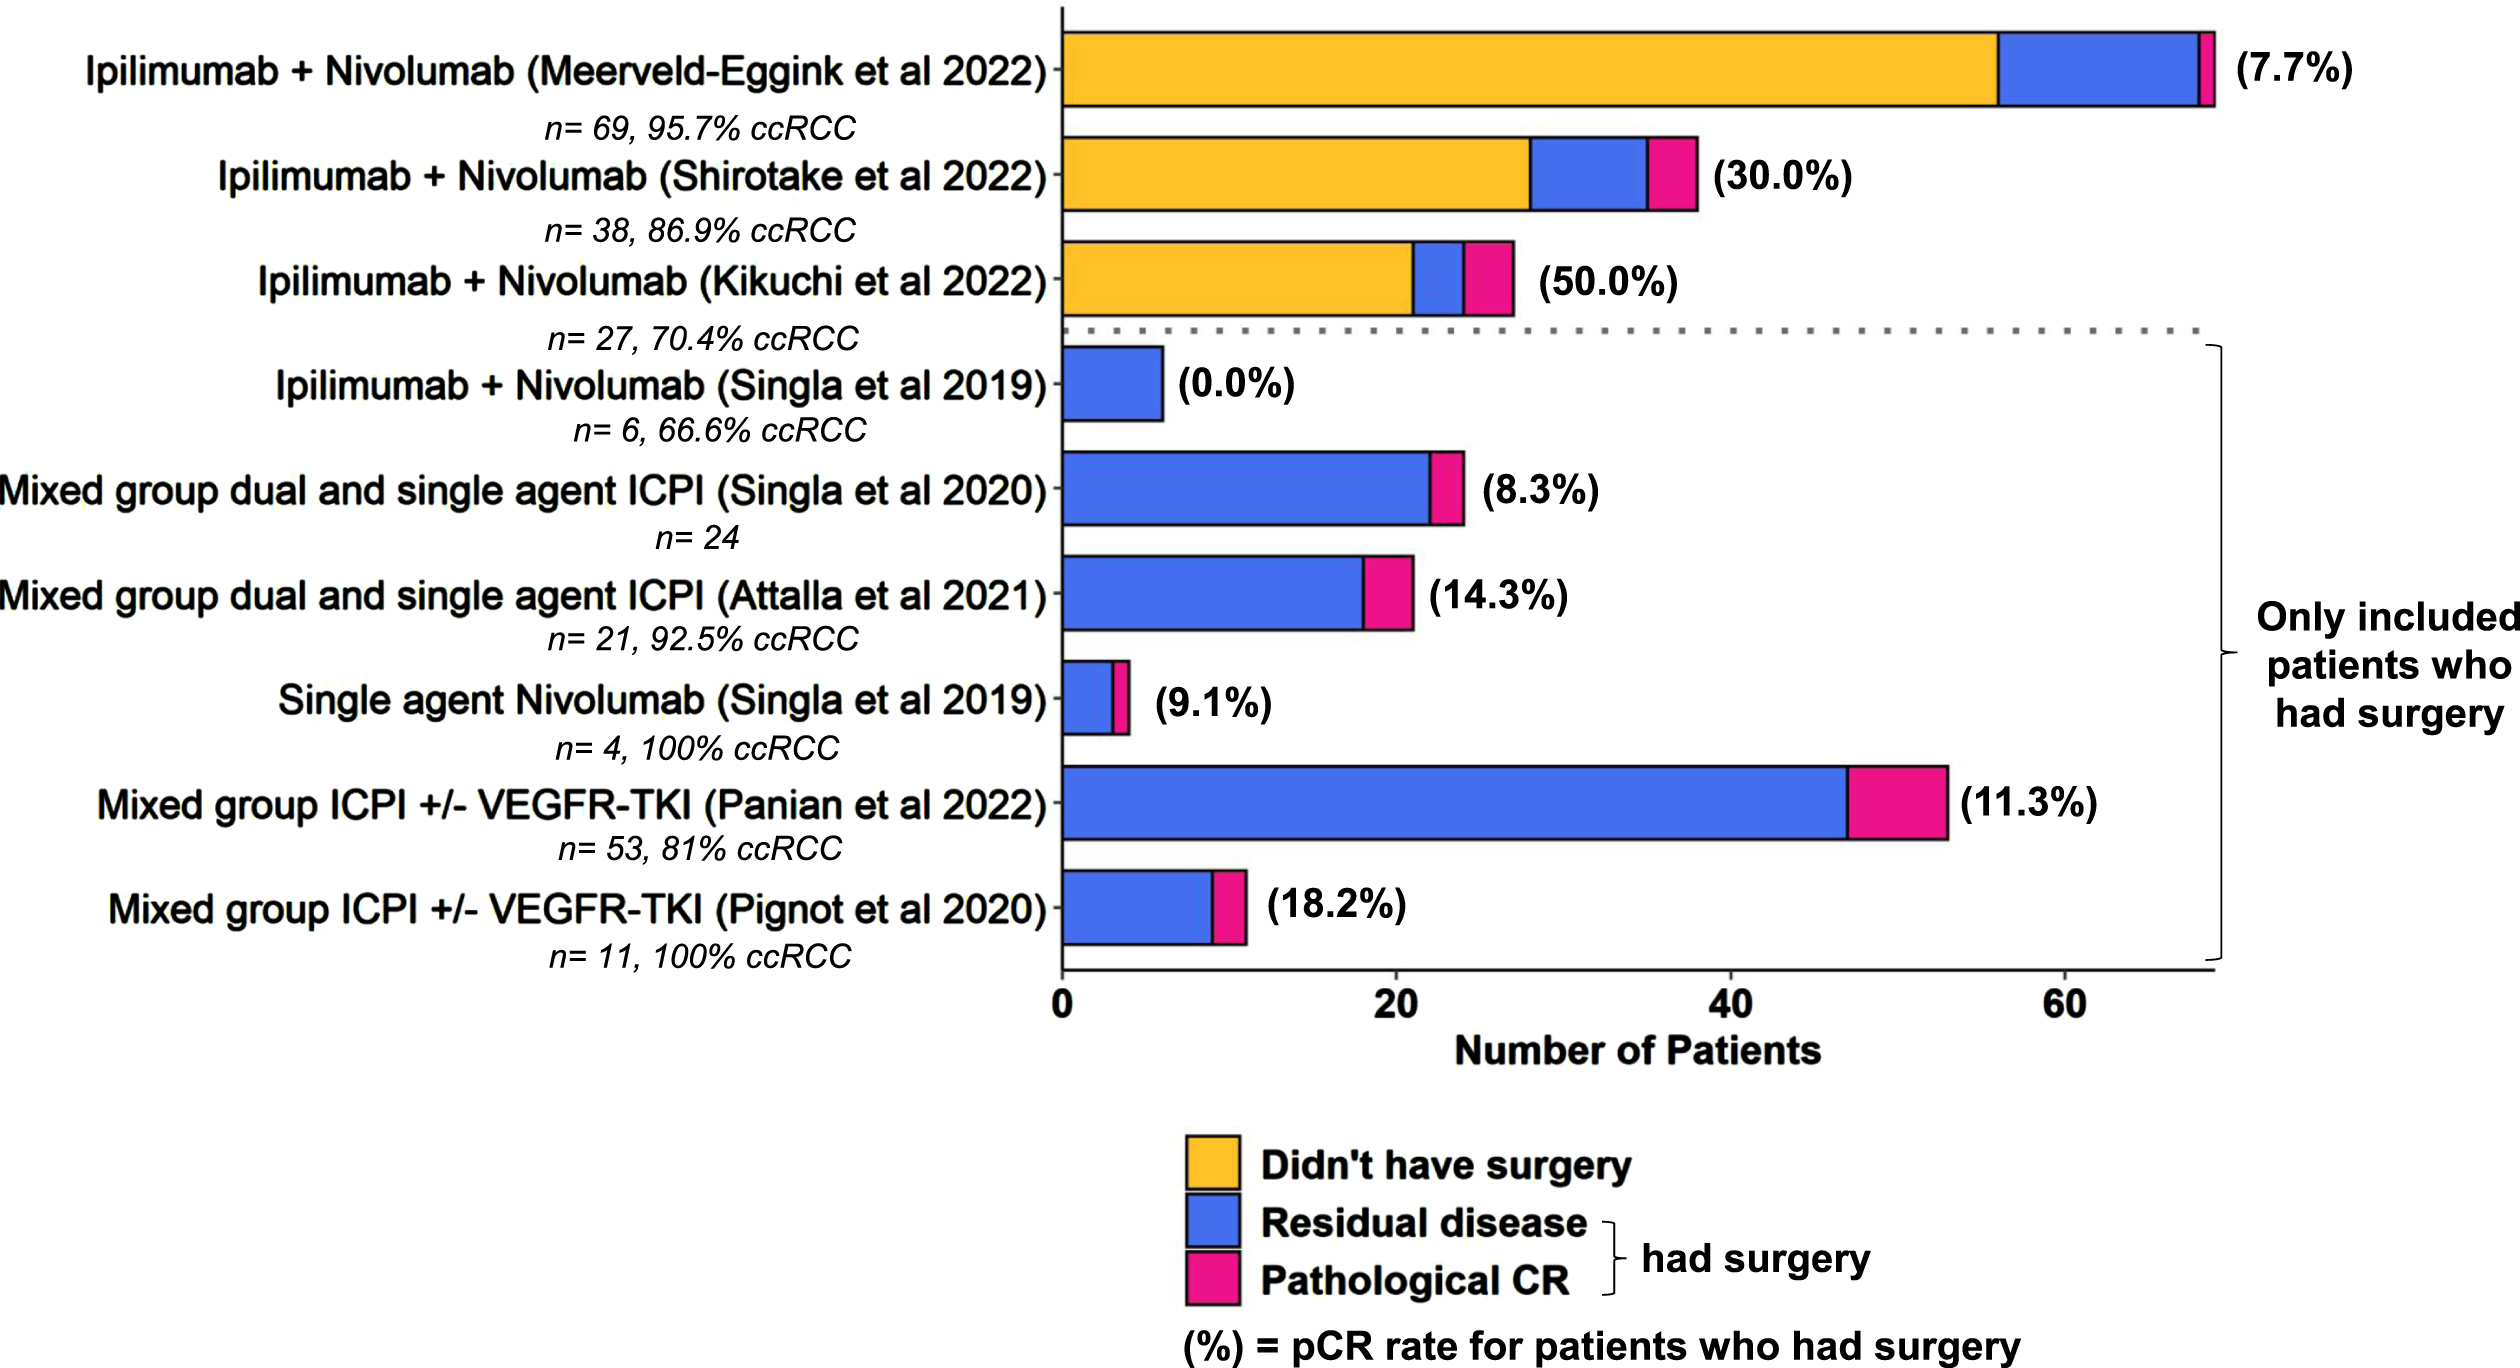 Pathological response rates are summarised for patients who underwent nephrectomy after a period of ICPI treatment. The number of patients who were on treatment but did not undergo surgery are included where the data was available. Numbers of patients in the study and % clear cell RCC subtype are also indicated where available.